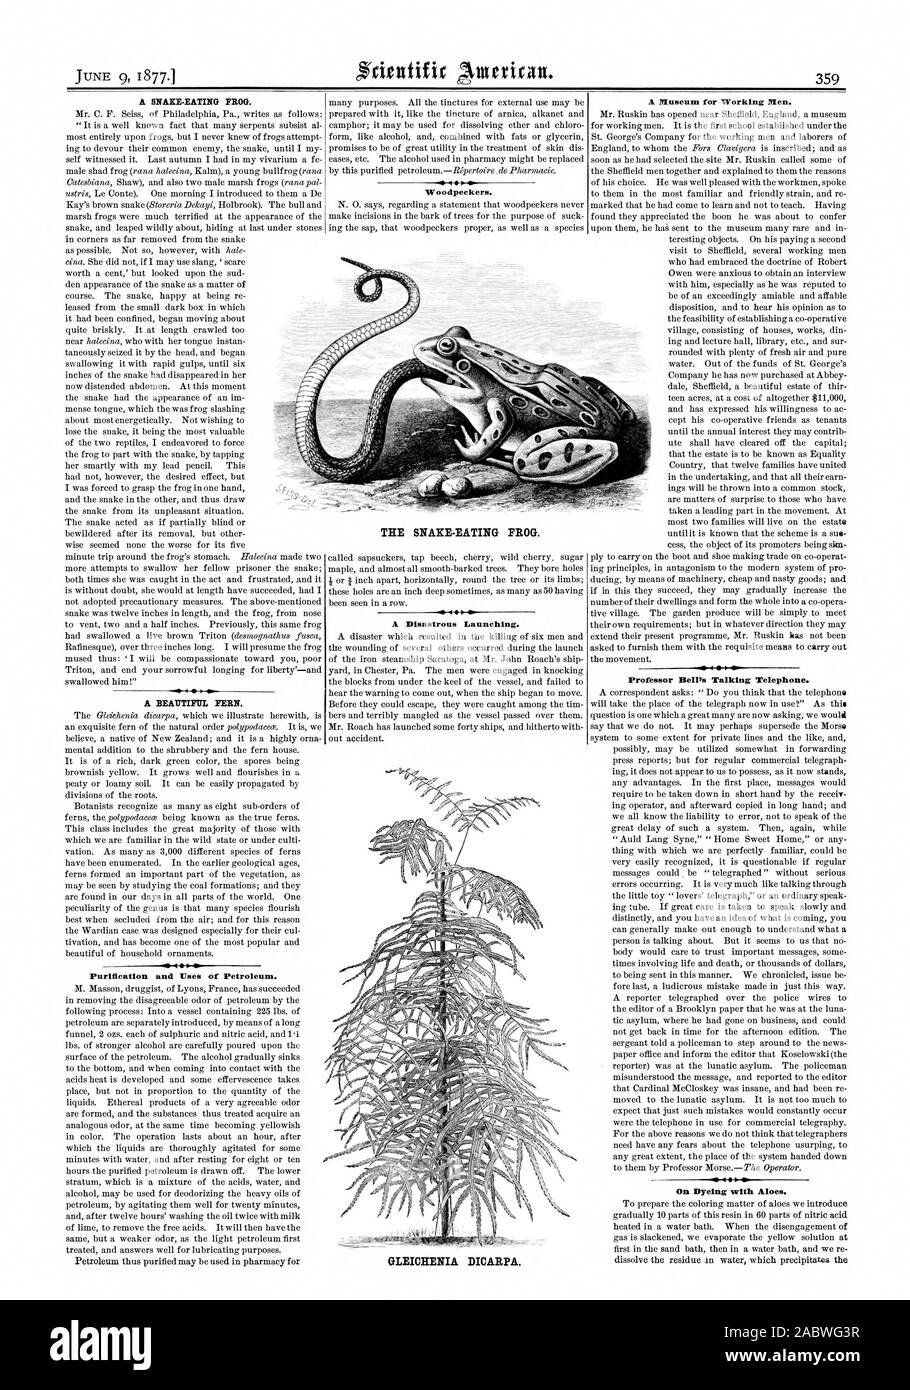 A SNAKE-EATING FROG. Woodpeckers. A Museum for Working Men. Professor Bell's Talking Telephone. On Dyeing with Aloes. A Disastrous Launching. 4  Purification and ITses of Petroleum. GLEICHENIA DICARPA. THE SNAKE-EATING FROG., scientific american, 1877-06-09 Stock Photo